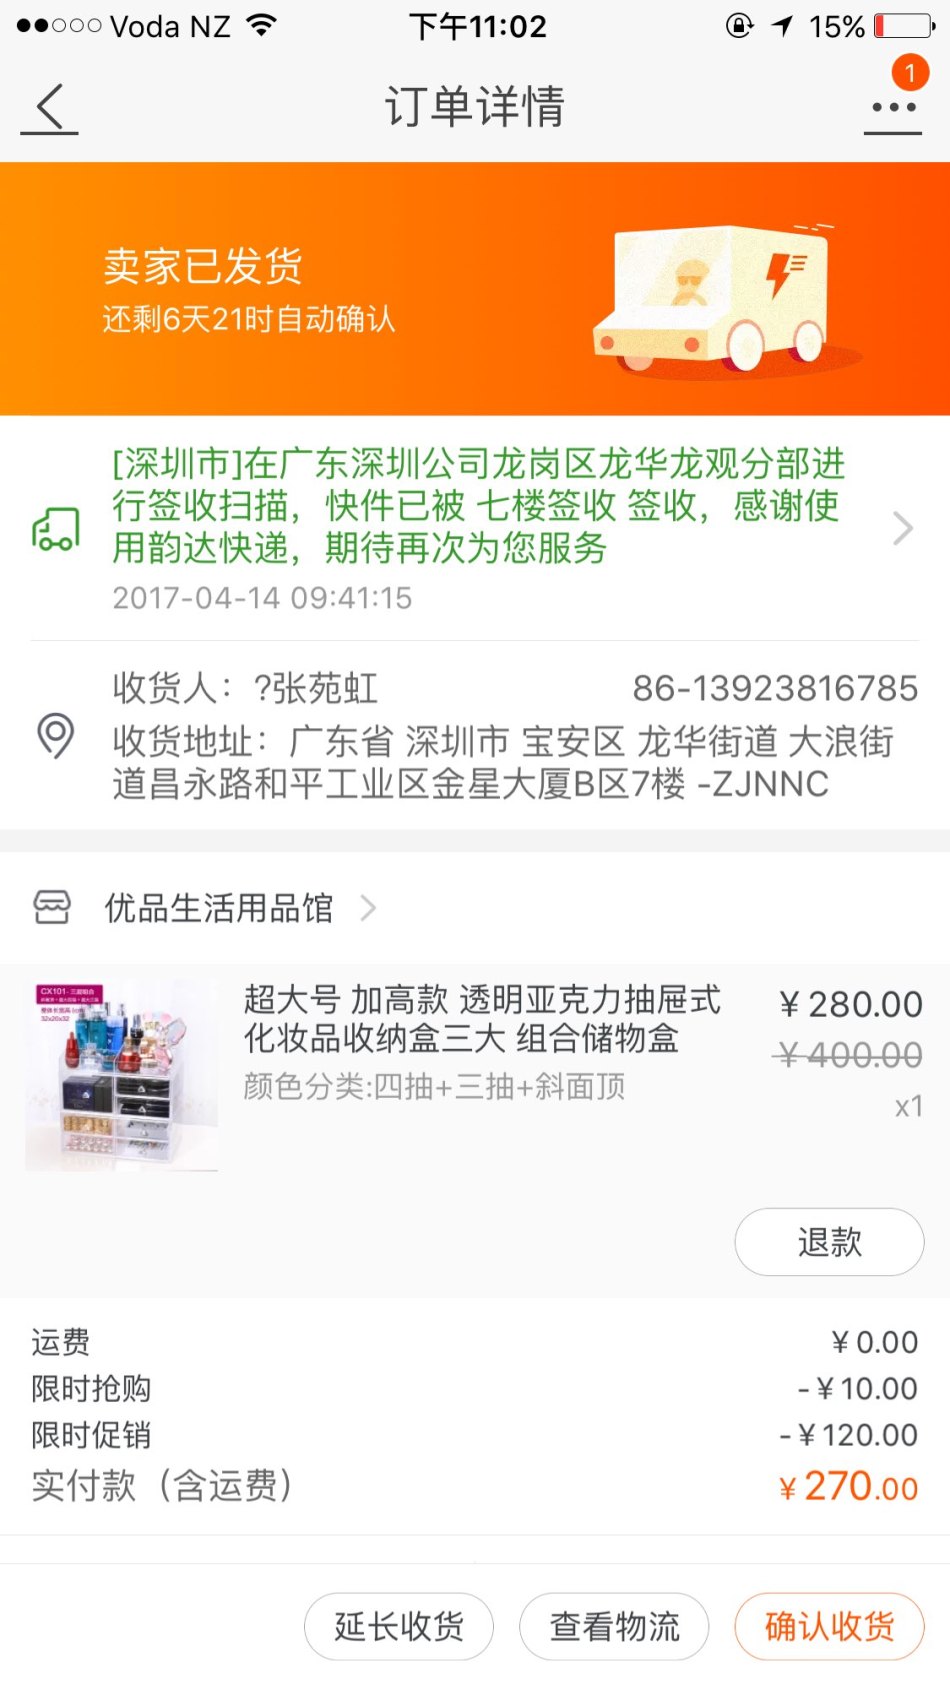 http://img1.superbuy.com/images/consult/2017/04/19/b6694a230b3aacb8195d7aac7966f803.jpg?x-oss-process=image/resize,w_950